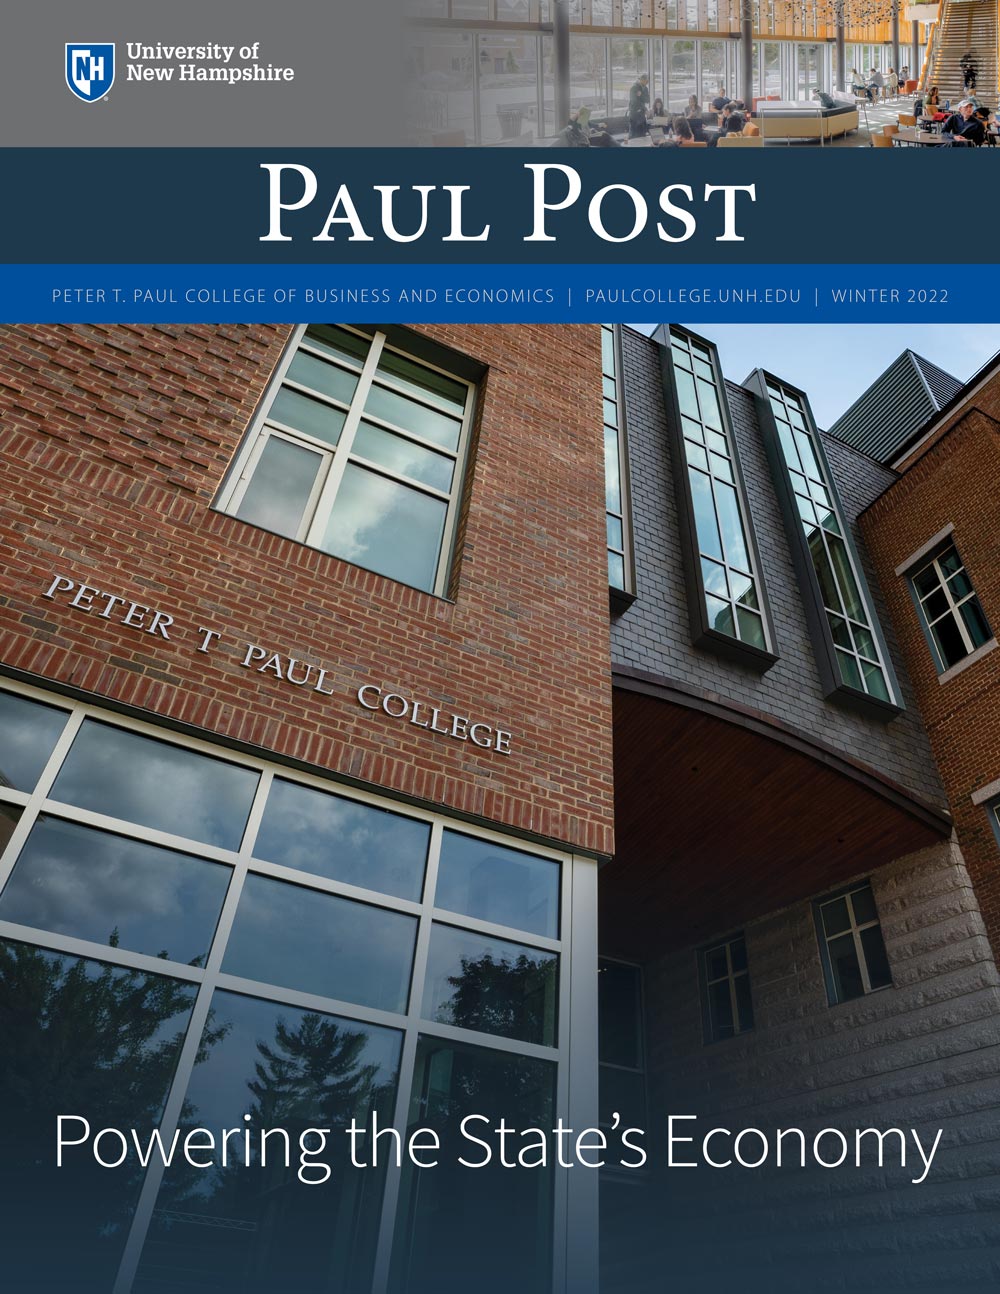 UNH Paul Post Newsletter Cover Winter 2022